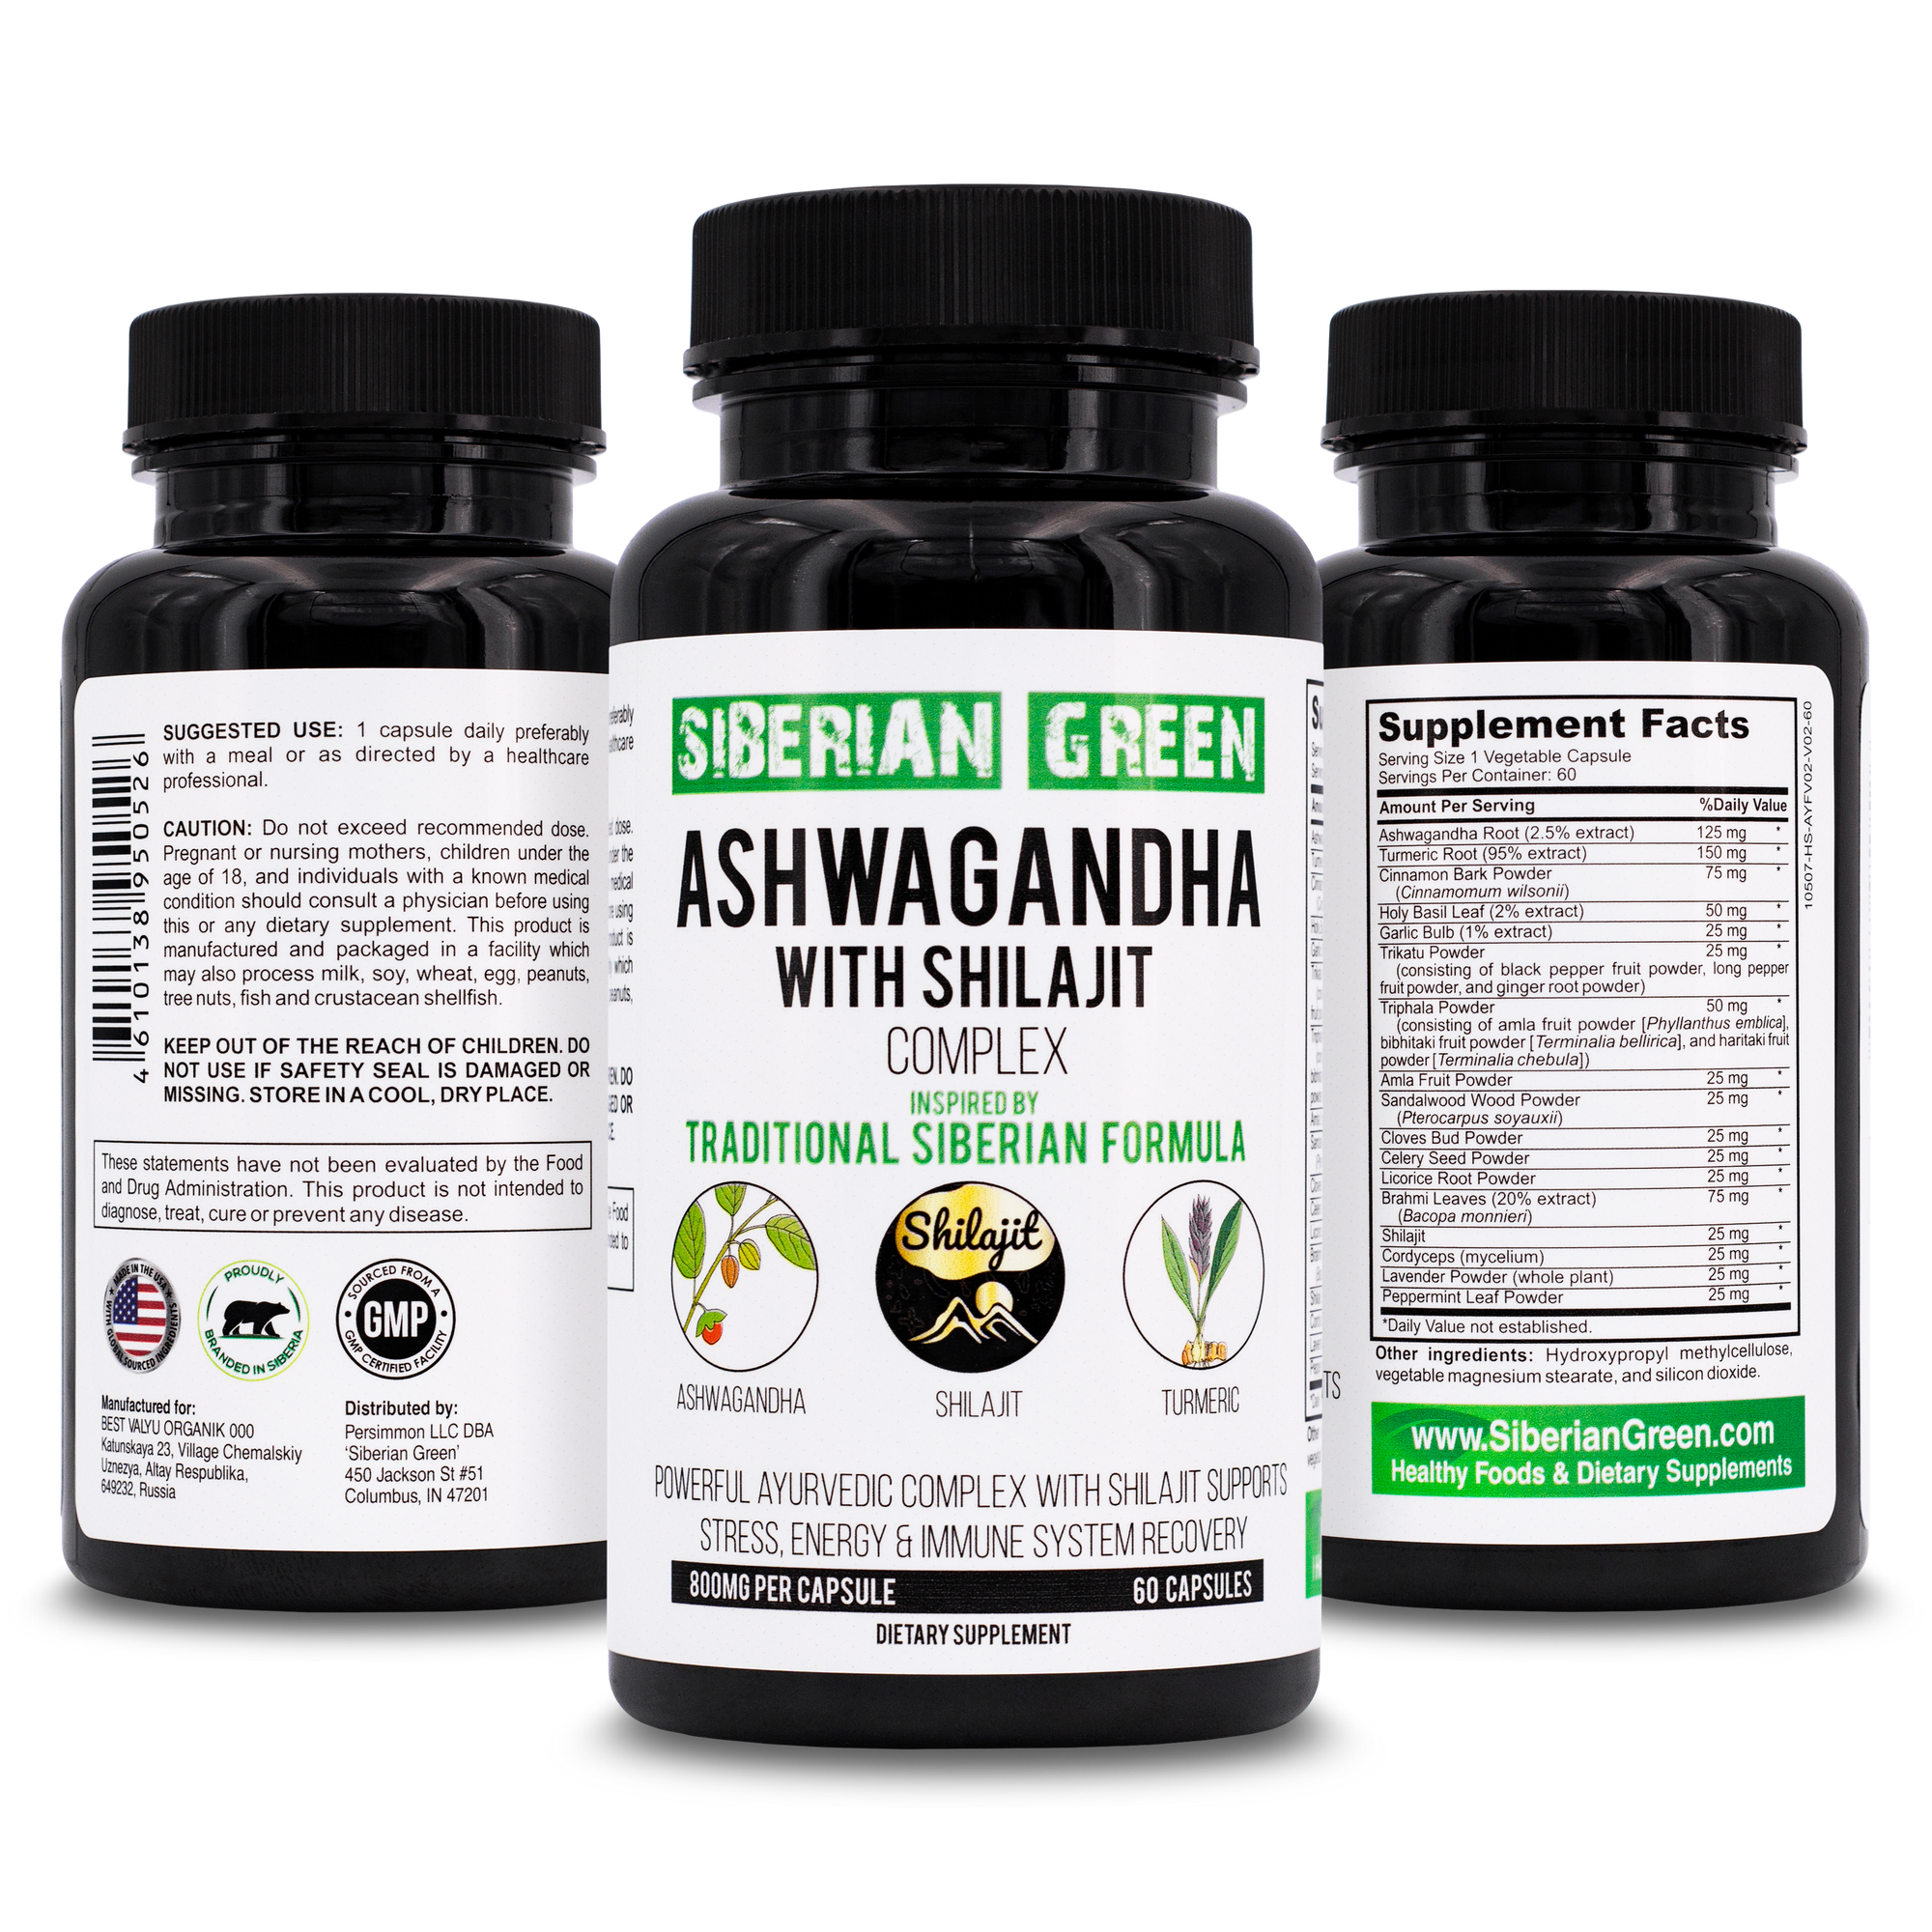 Shilajit and Ashwagandha - why this is a great complementary supplements combo?